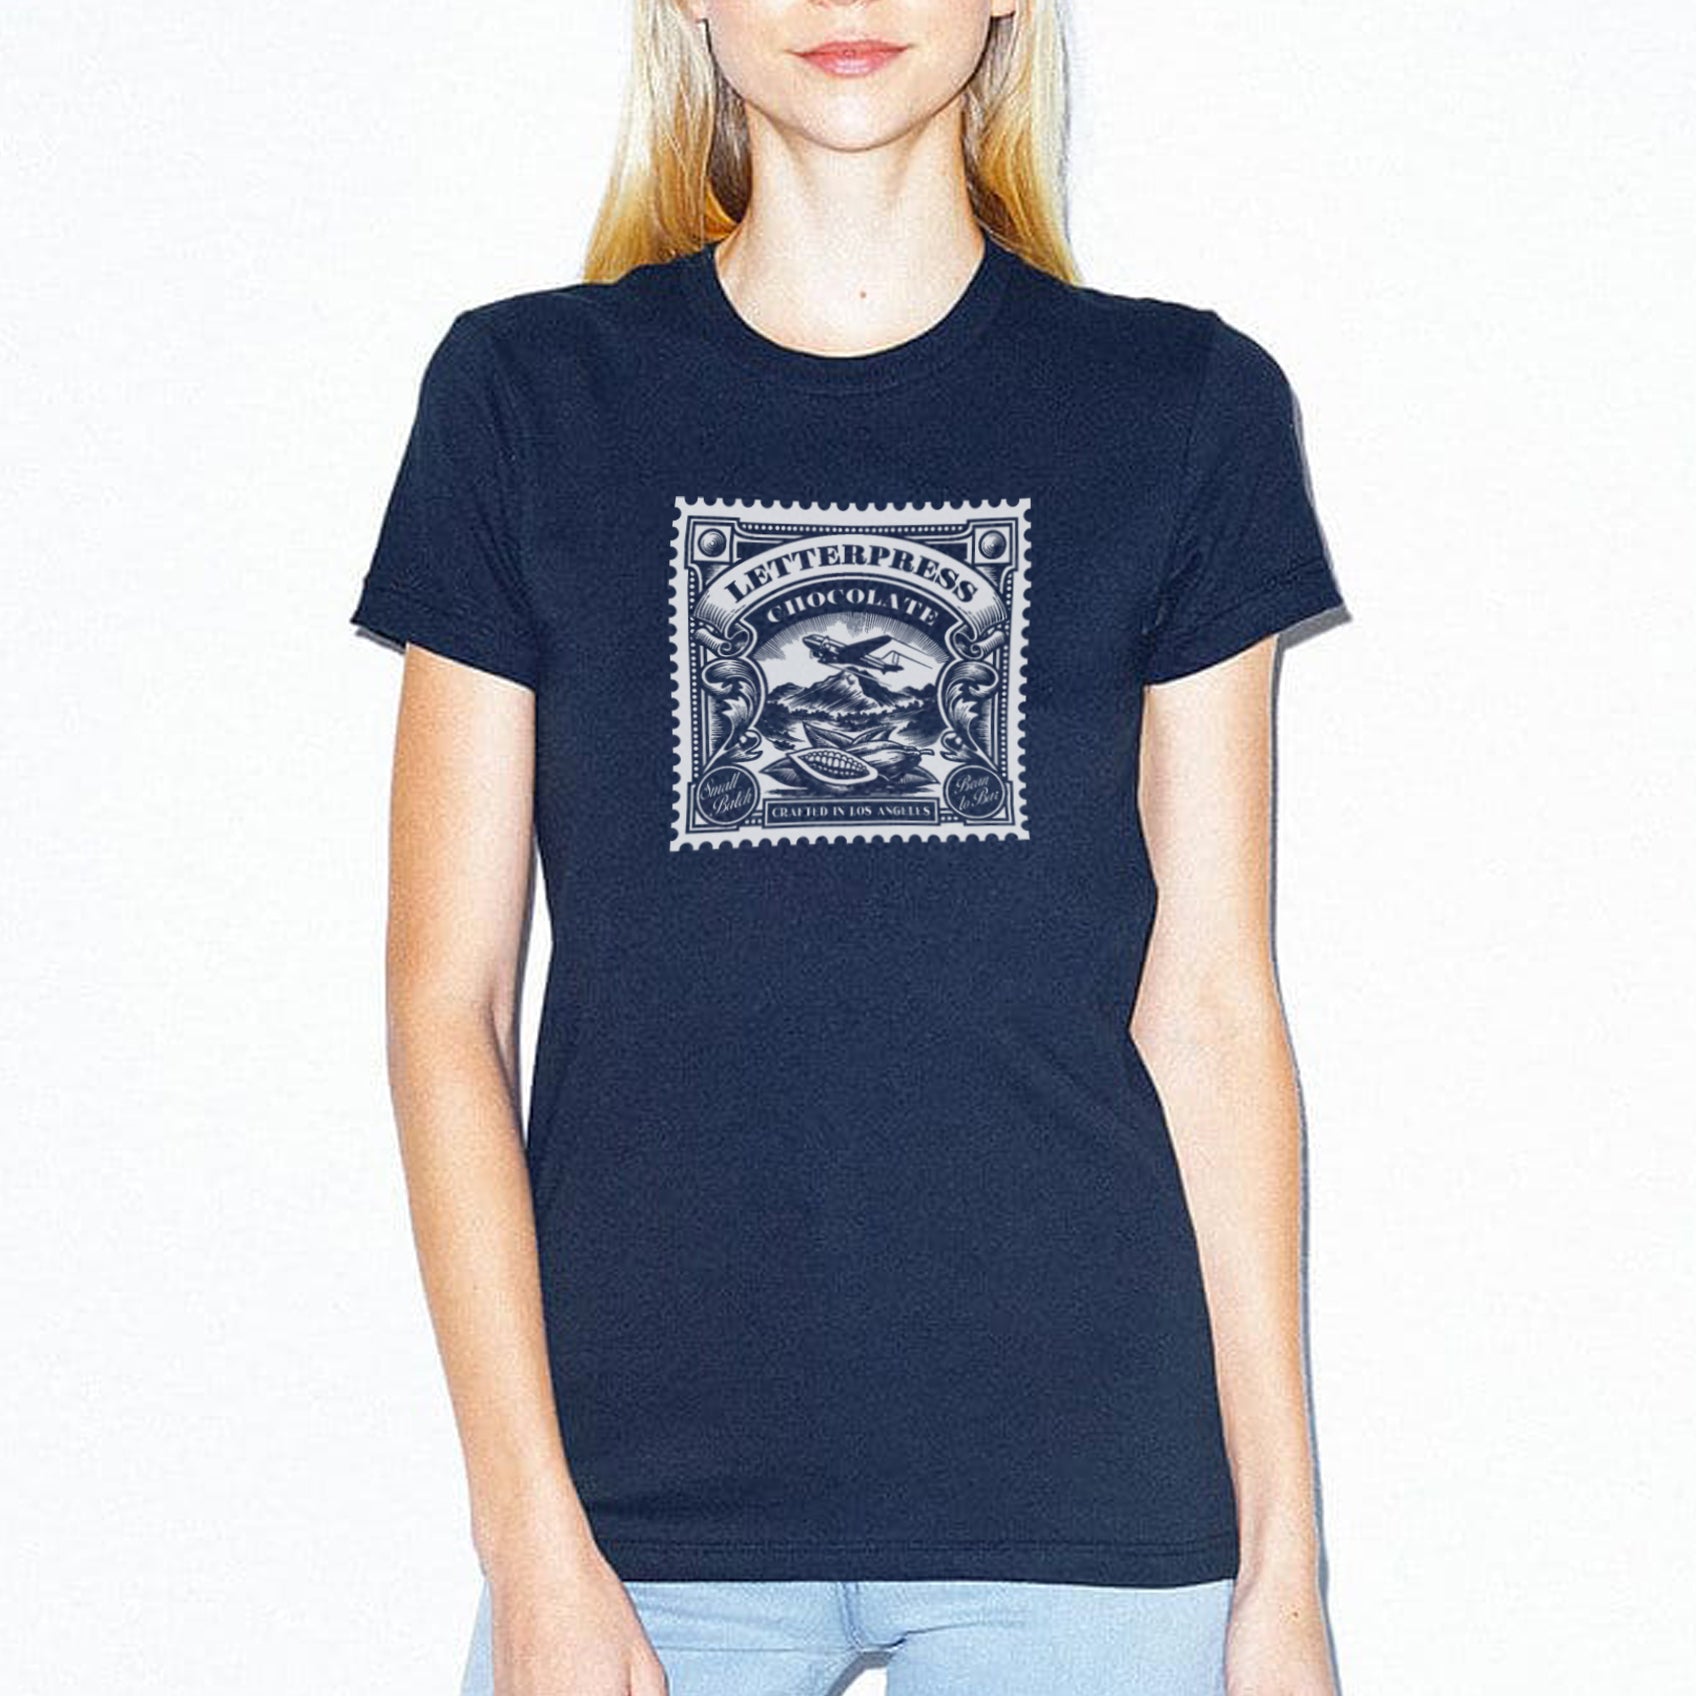 Women's navy - a woman wearing a tshirt with a white letterpress chocolate logo